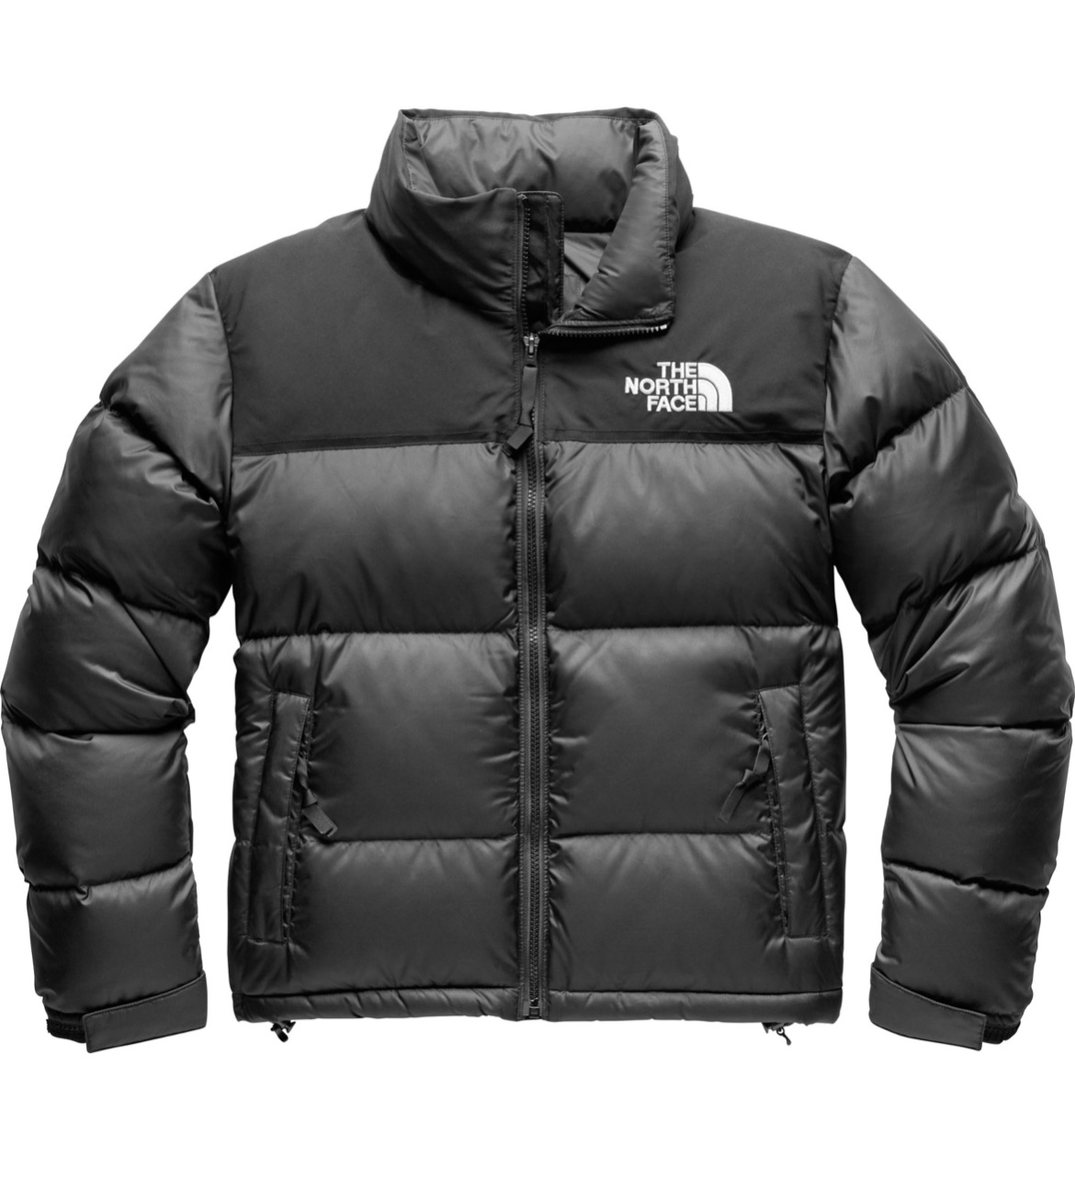 Vintage The North Face Eco Nuptse Down Jacket - Women's Size 